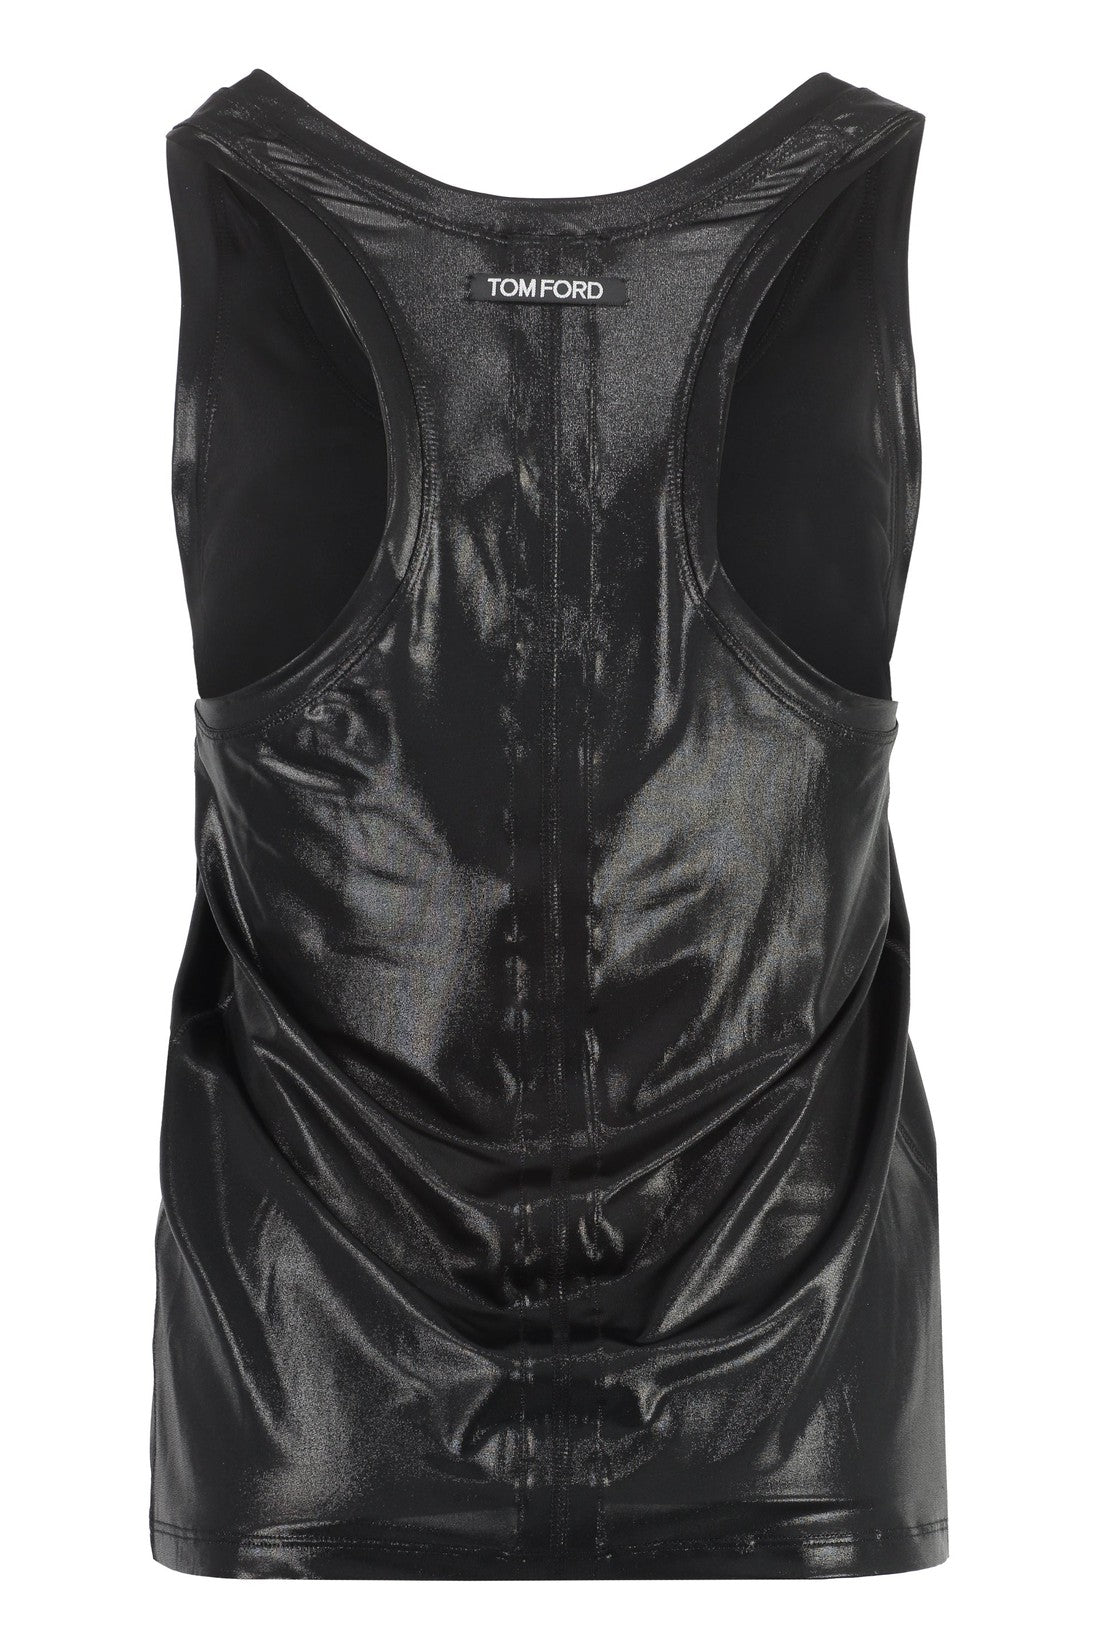 Tom Ford-OUTLET-SALE-Viscose tank top-ARCHIVIST